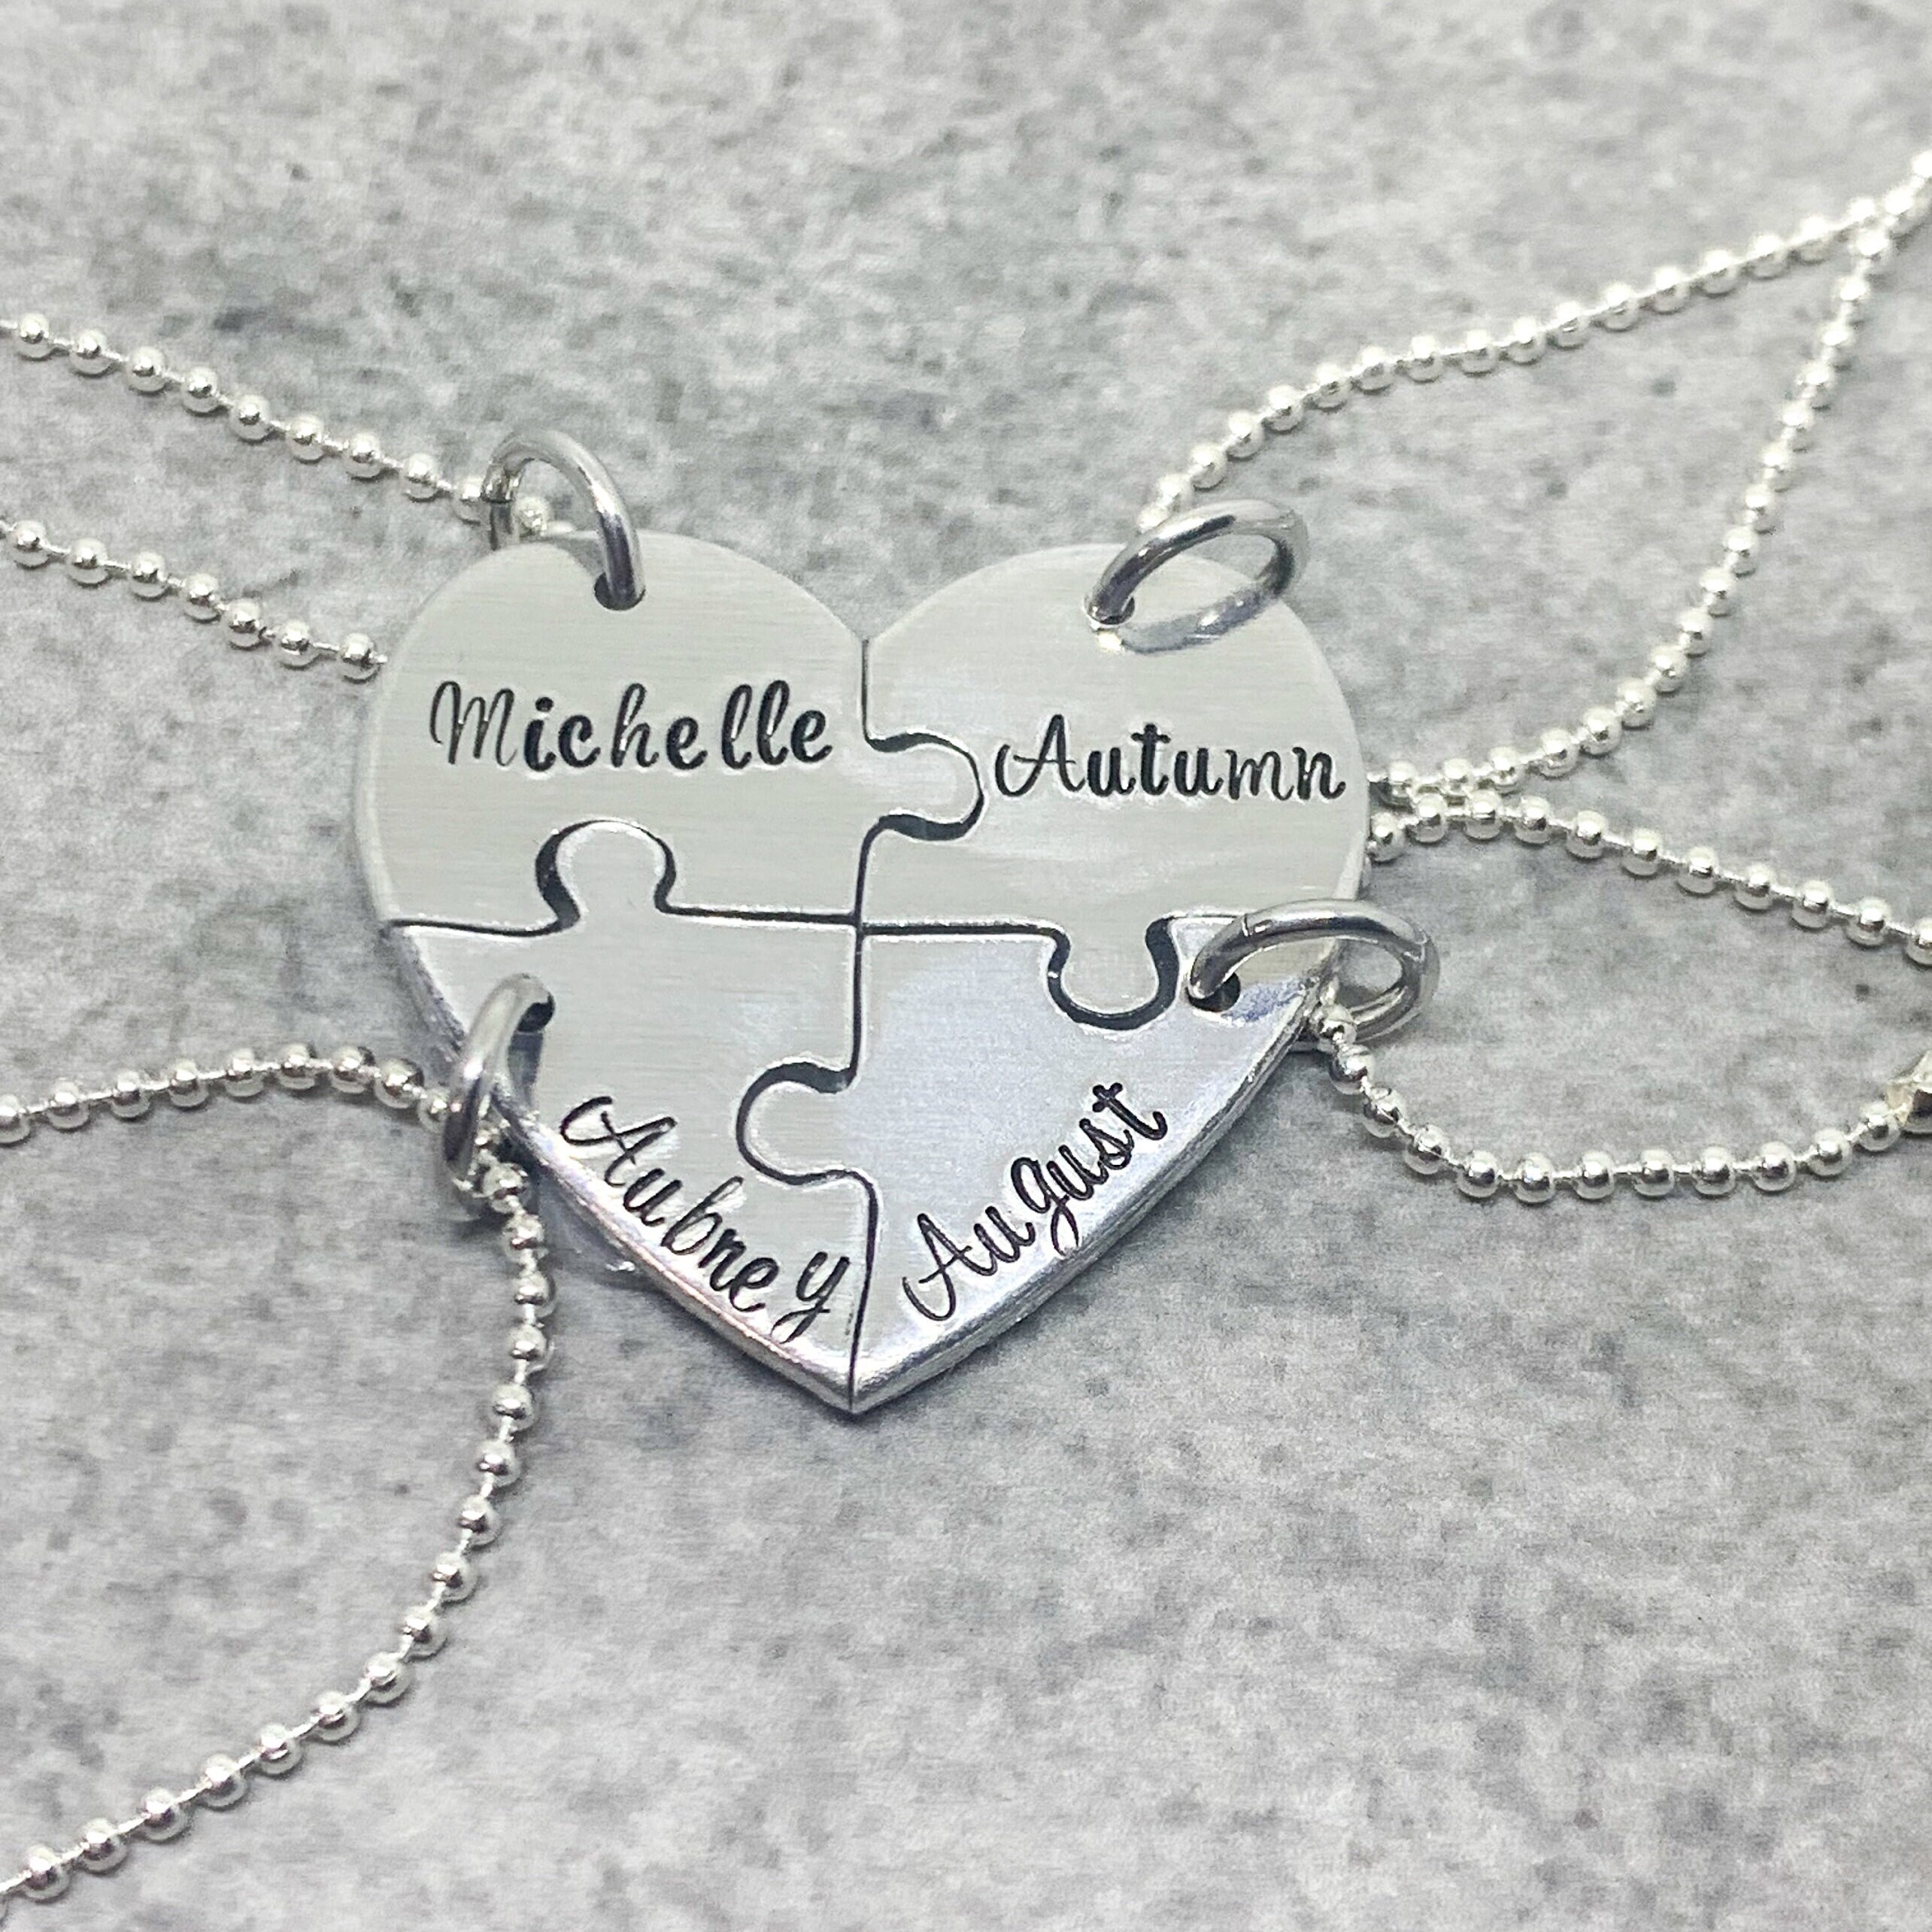 Best Friends Necklaces, Matching Necklace Set, Crossing Arrows